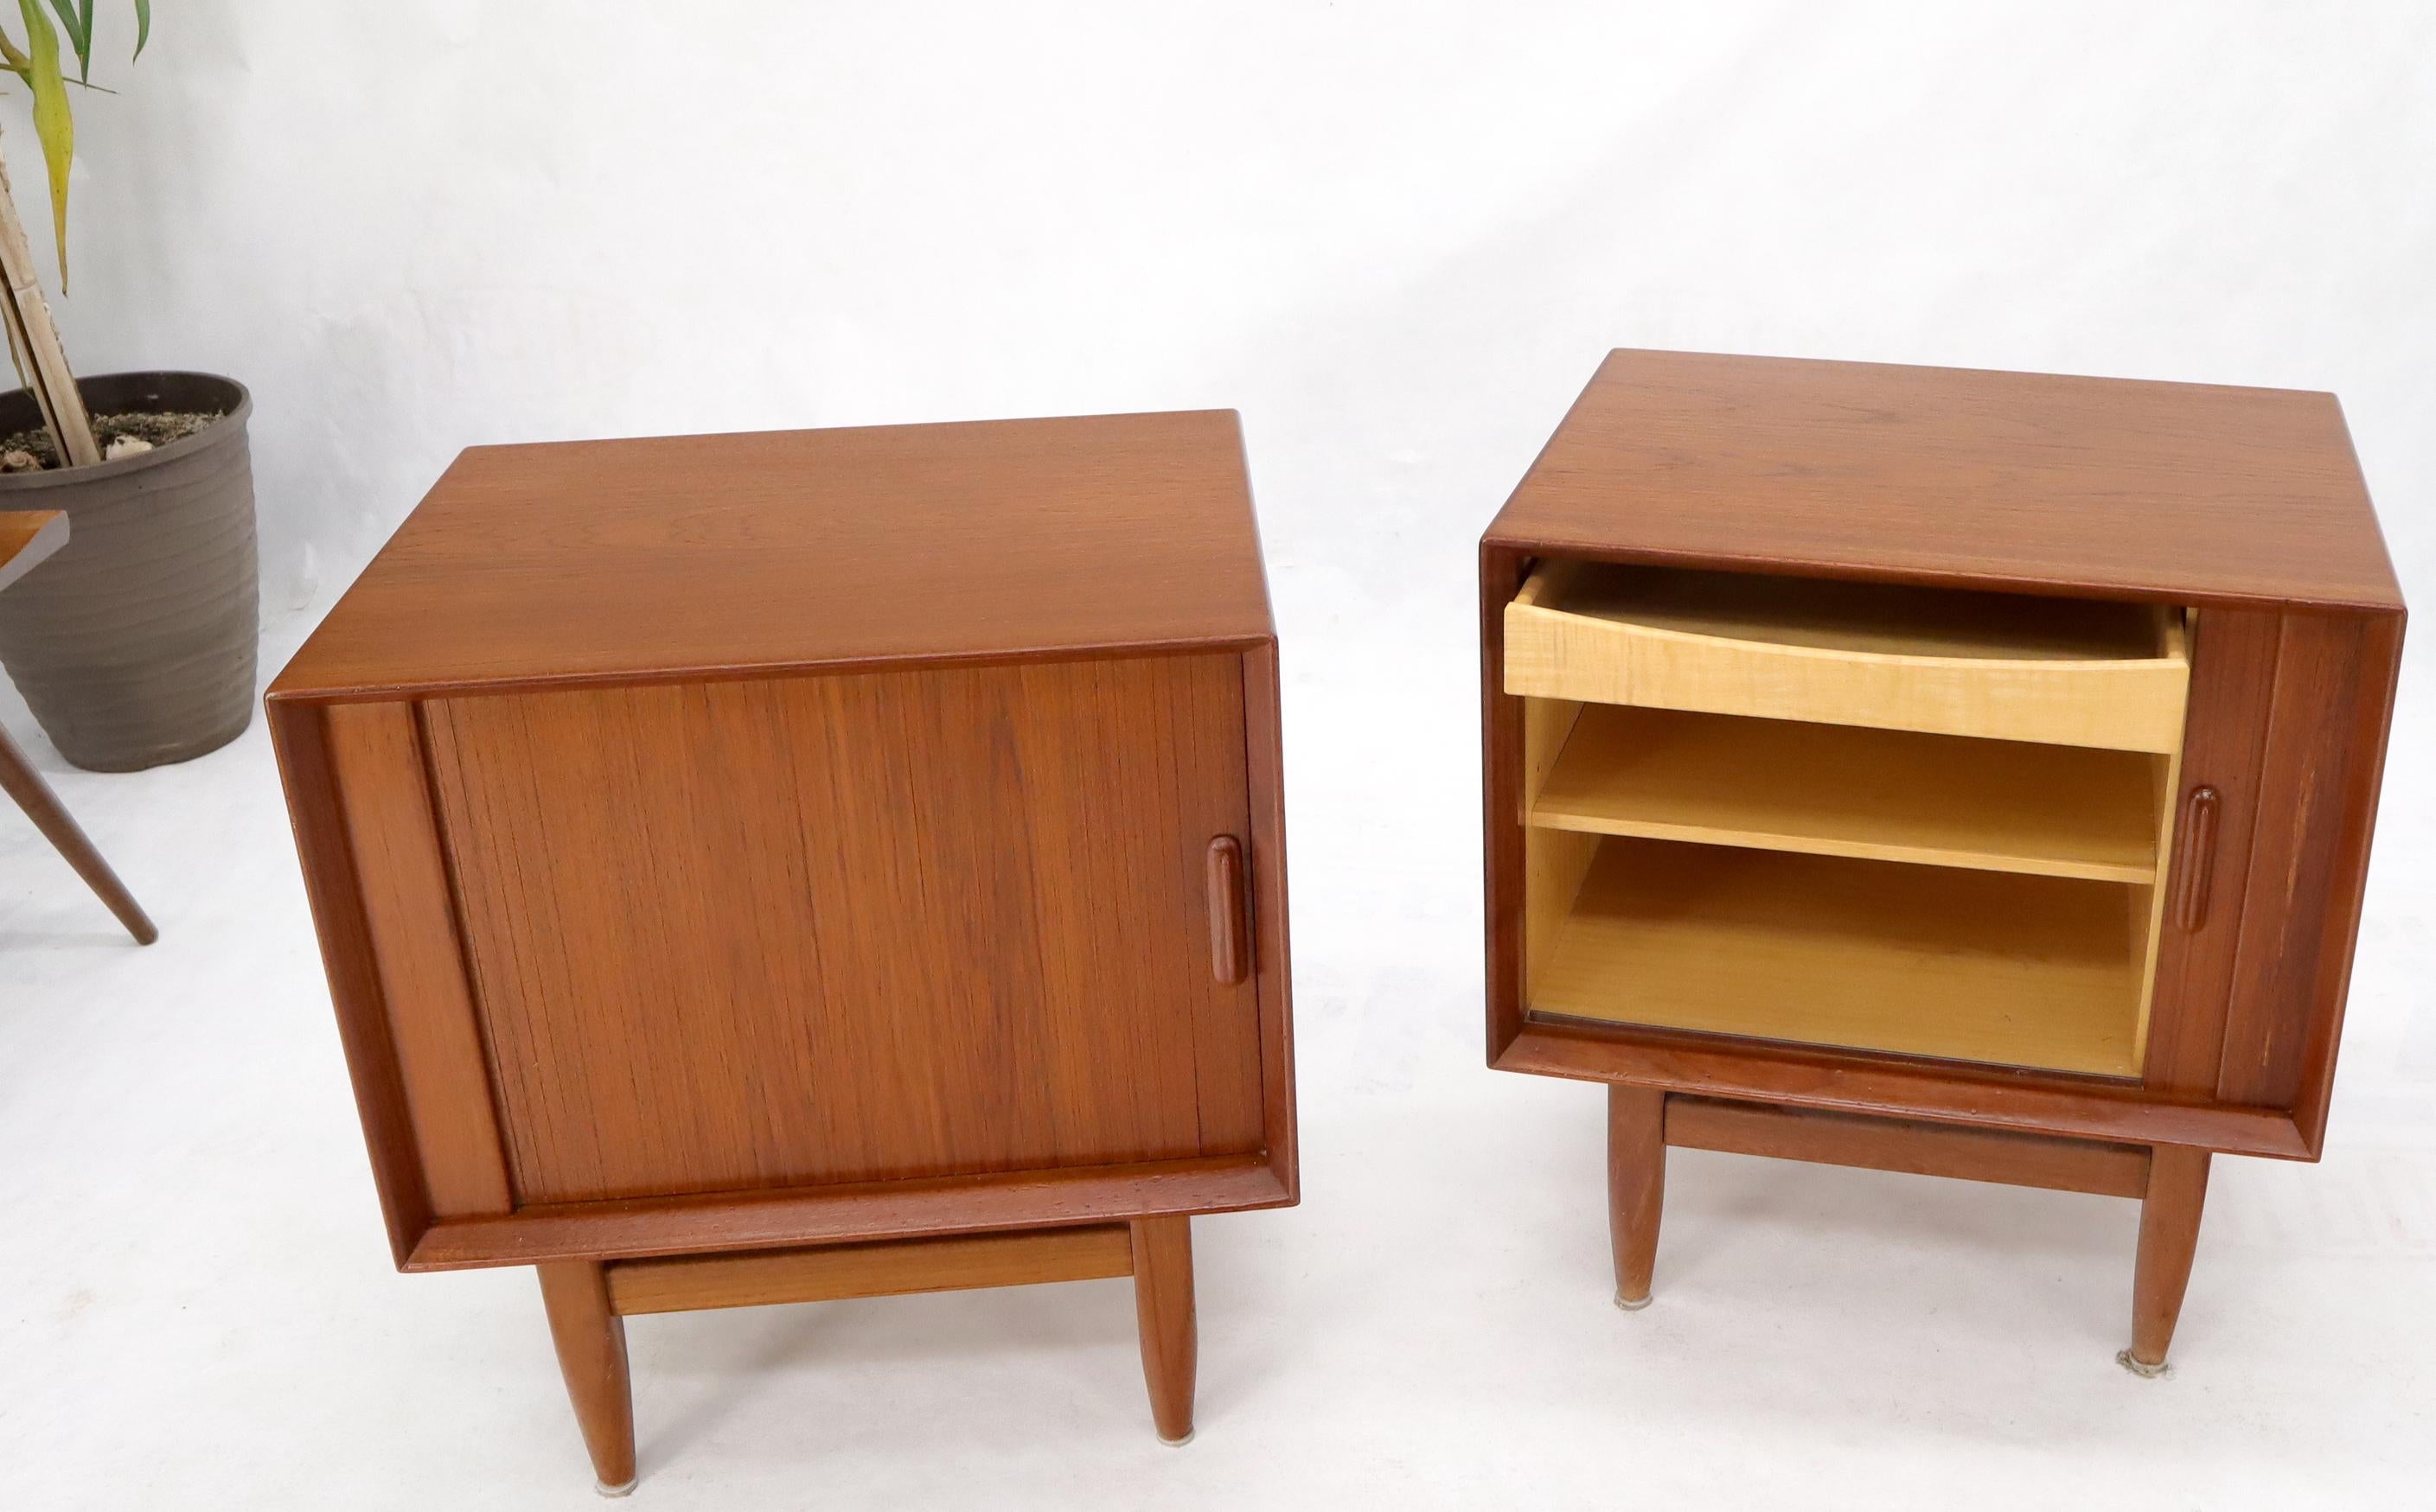 Danish modern teak tambour doors end tables cabinets nightstands with finished backs.